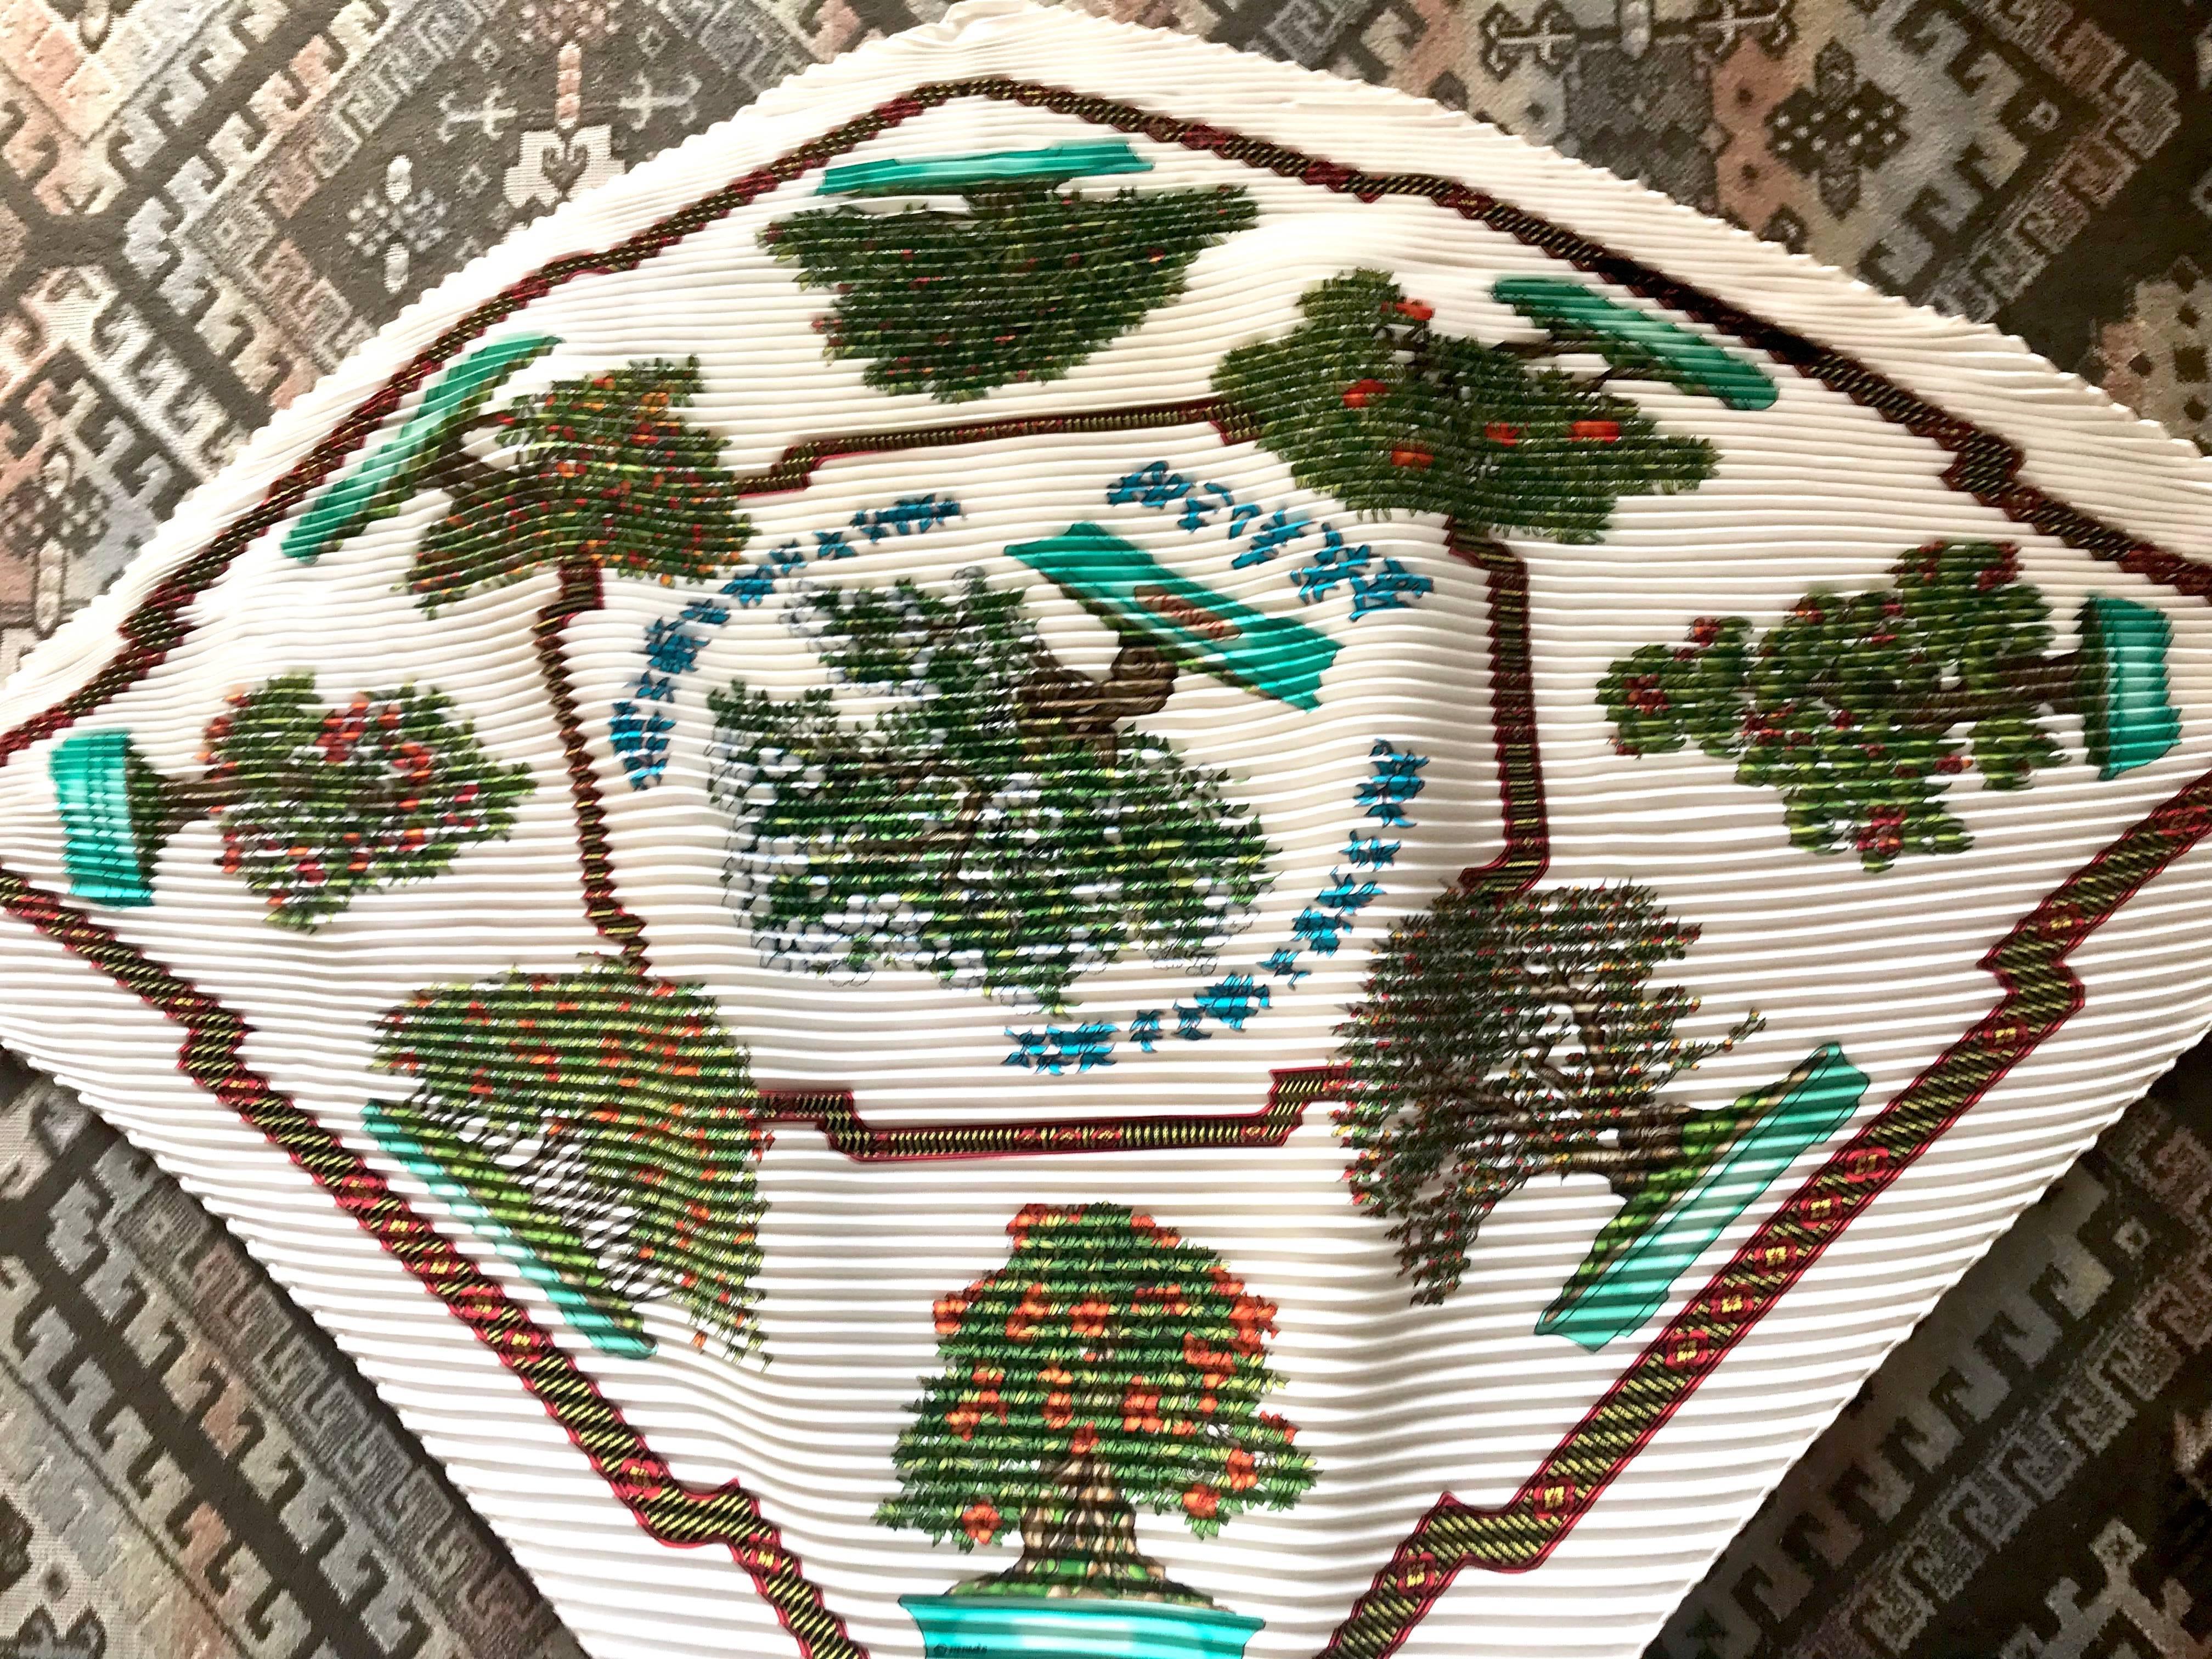 1990s. Vintage HERMES carre pleated silk scarf, harness, BONSAI flower and fruits print in white, green, blue, red, and orange. Rare Bonsai.     

This is a 100% twill, pleated silk carre scarf from HERMES in the 90s. 
The BONSAI print is so popular